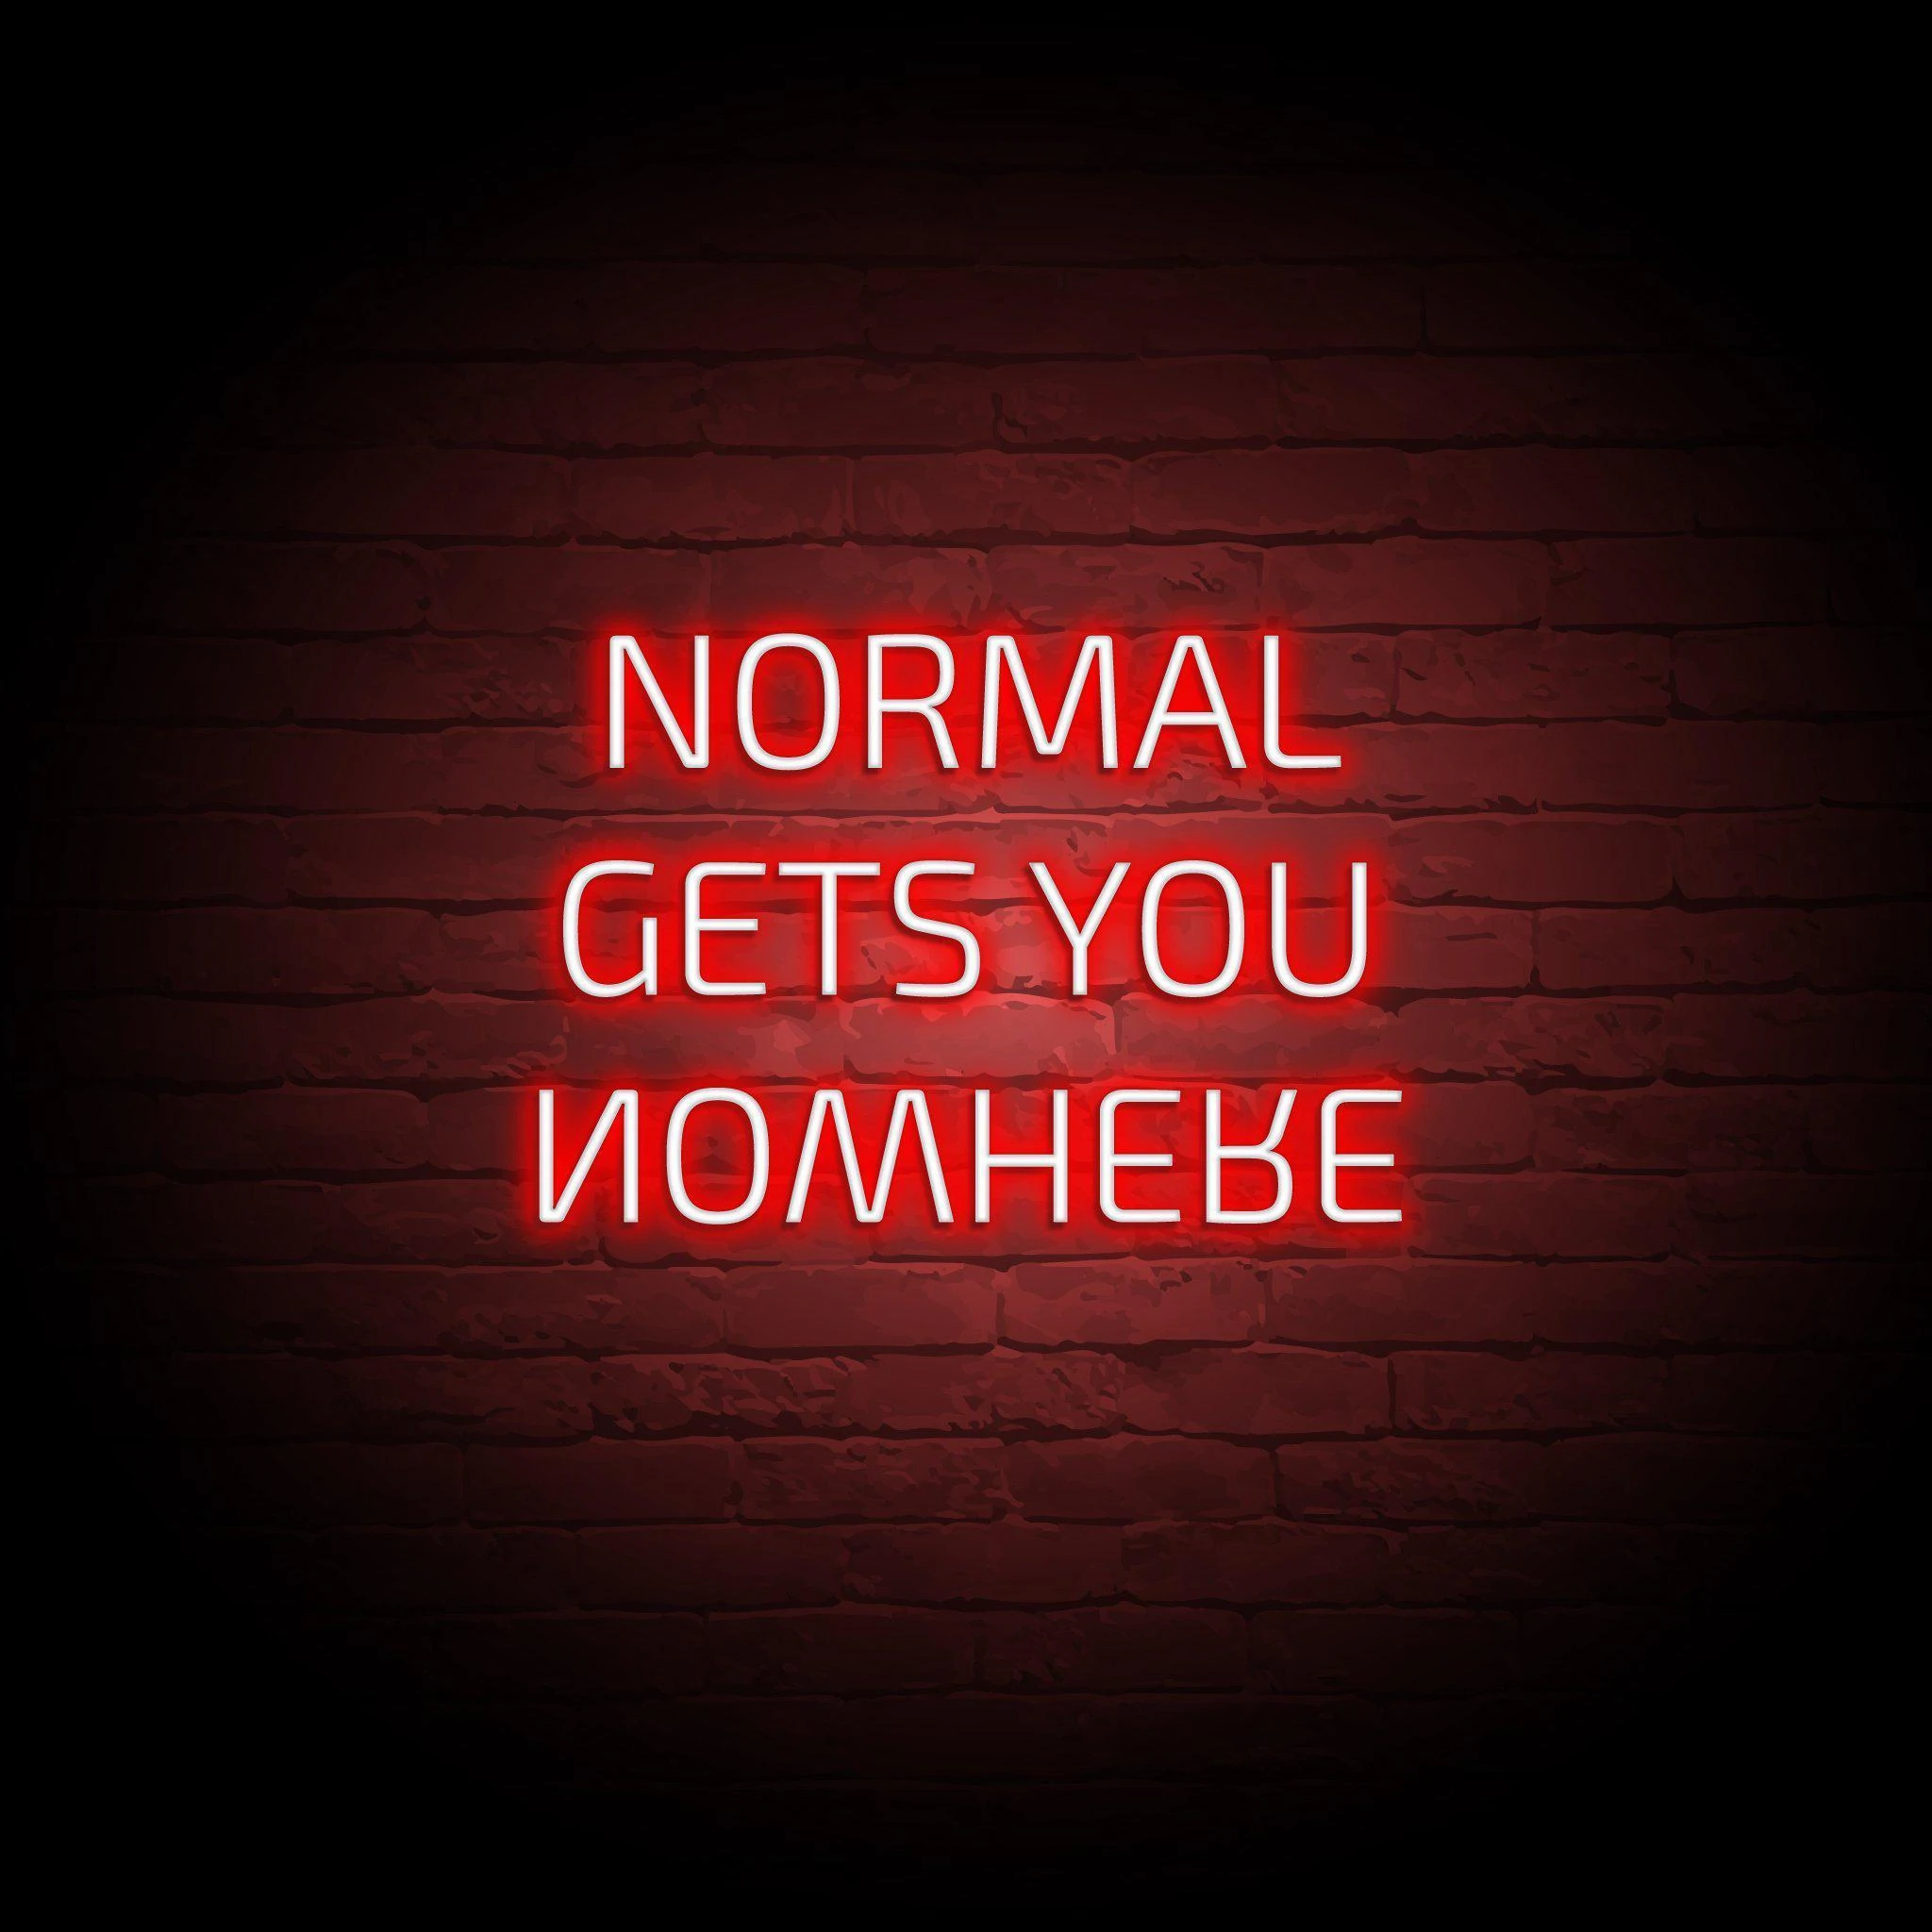 'NORMAL GETS YOU NOWHERE' NEON SIGN